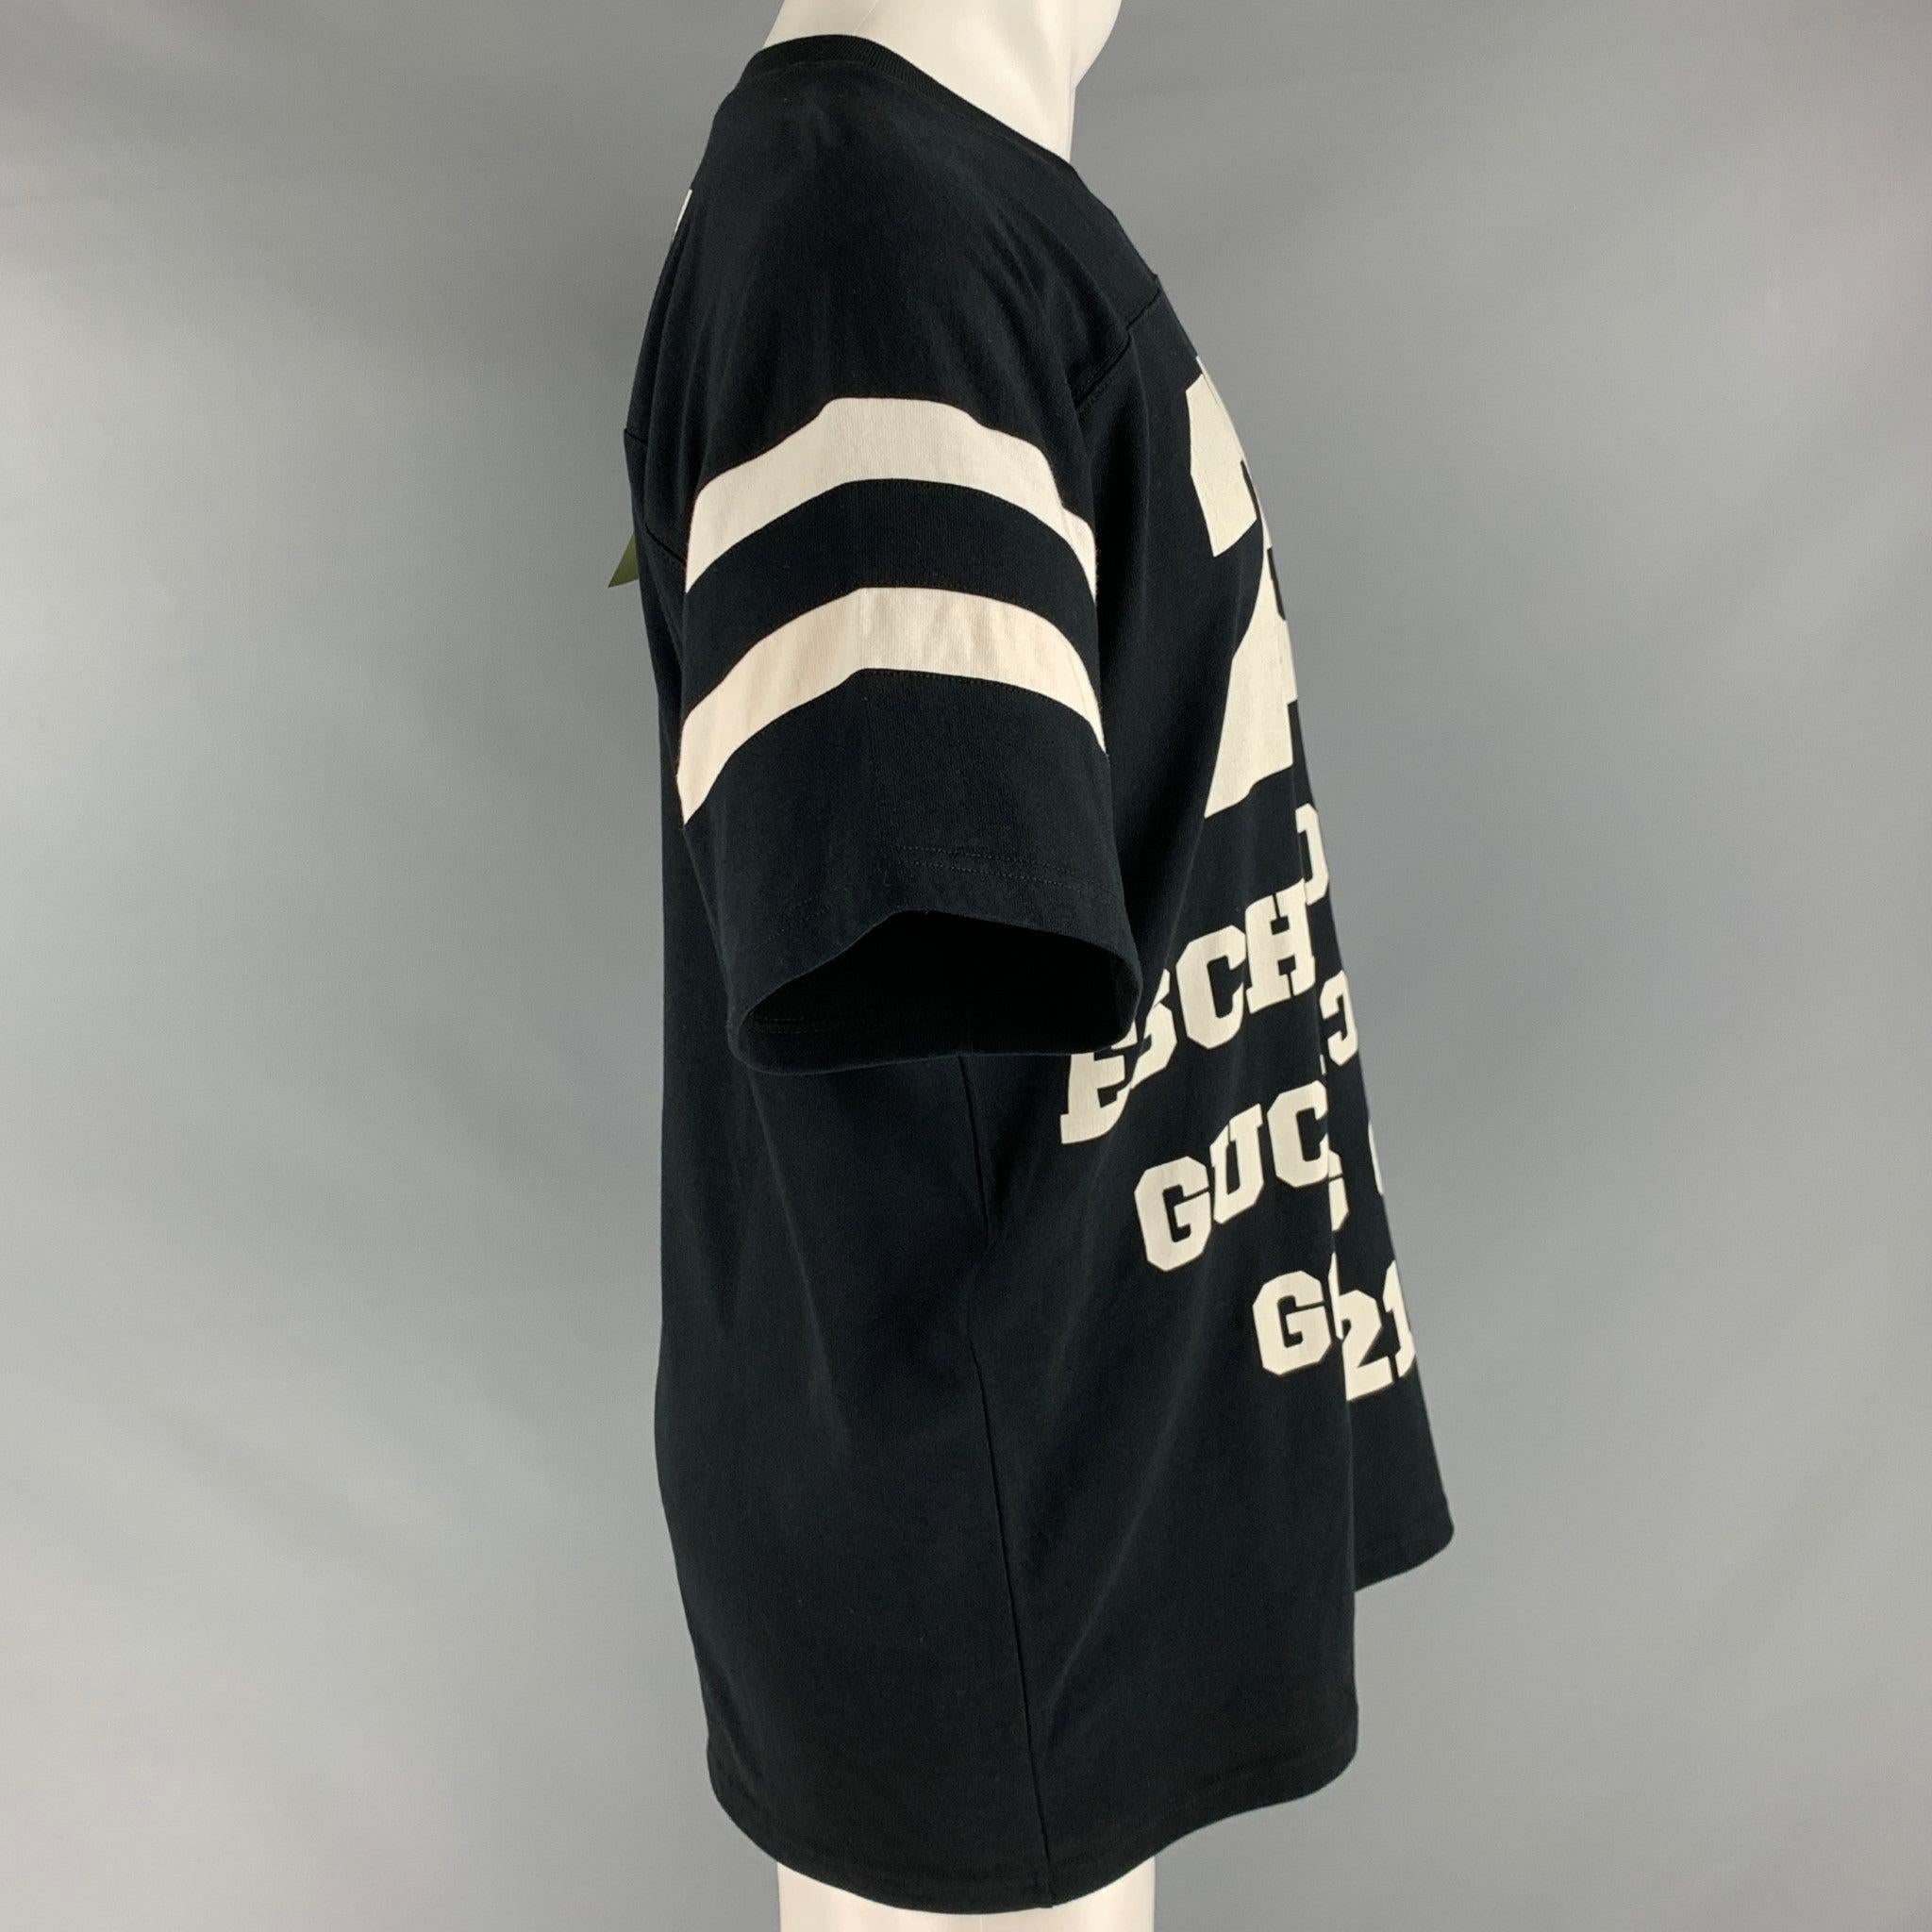 GUCCI t-shirt
in a black and white cotton fabric featuring white graphic text, athletic jersey style, and a crew neck. Made in Italy.New with Tags. 

Marked:   XS (160/84Y) 

Measurements: 
 
Shoulder: 17.5 inches  Chest: 43 inches  Sleeve: 10.5